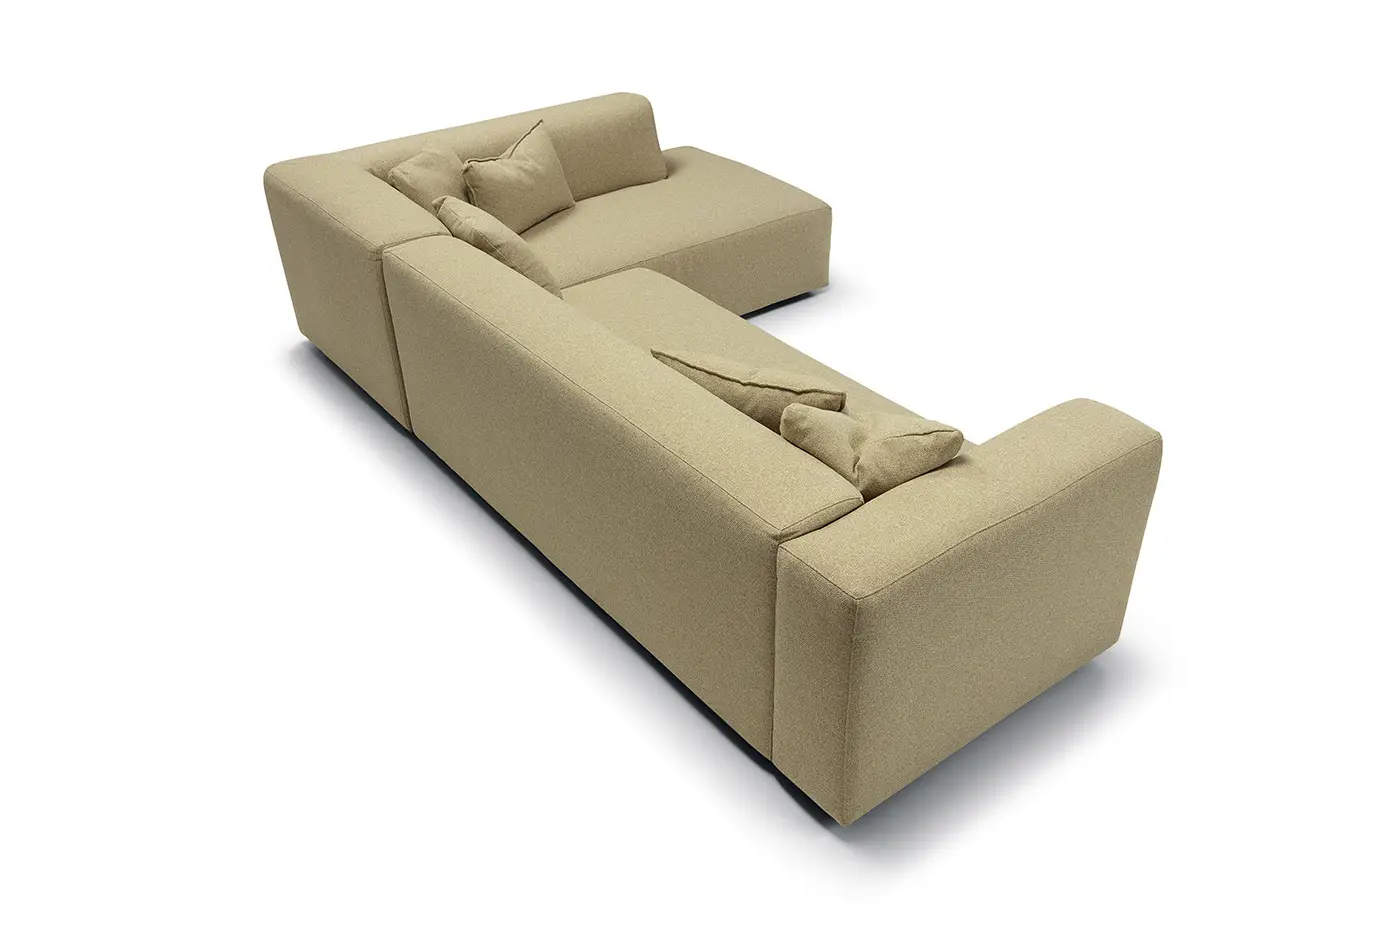 Milano furniture details, SITS accessories collection: | dimensions